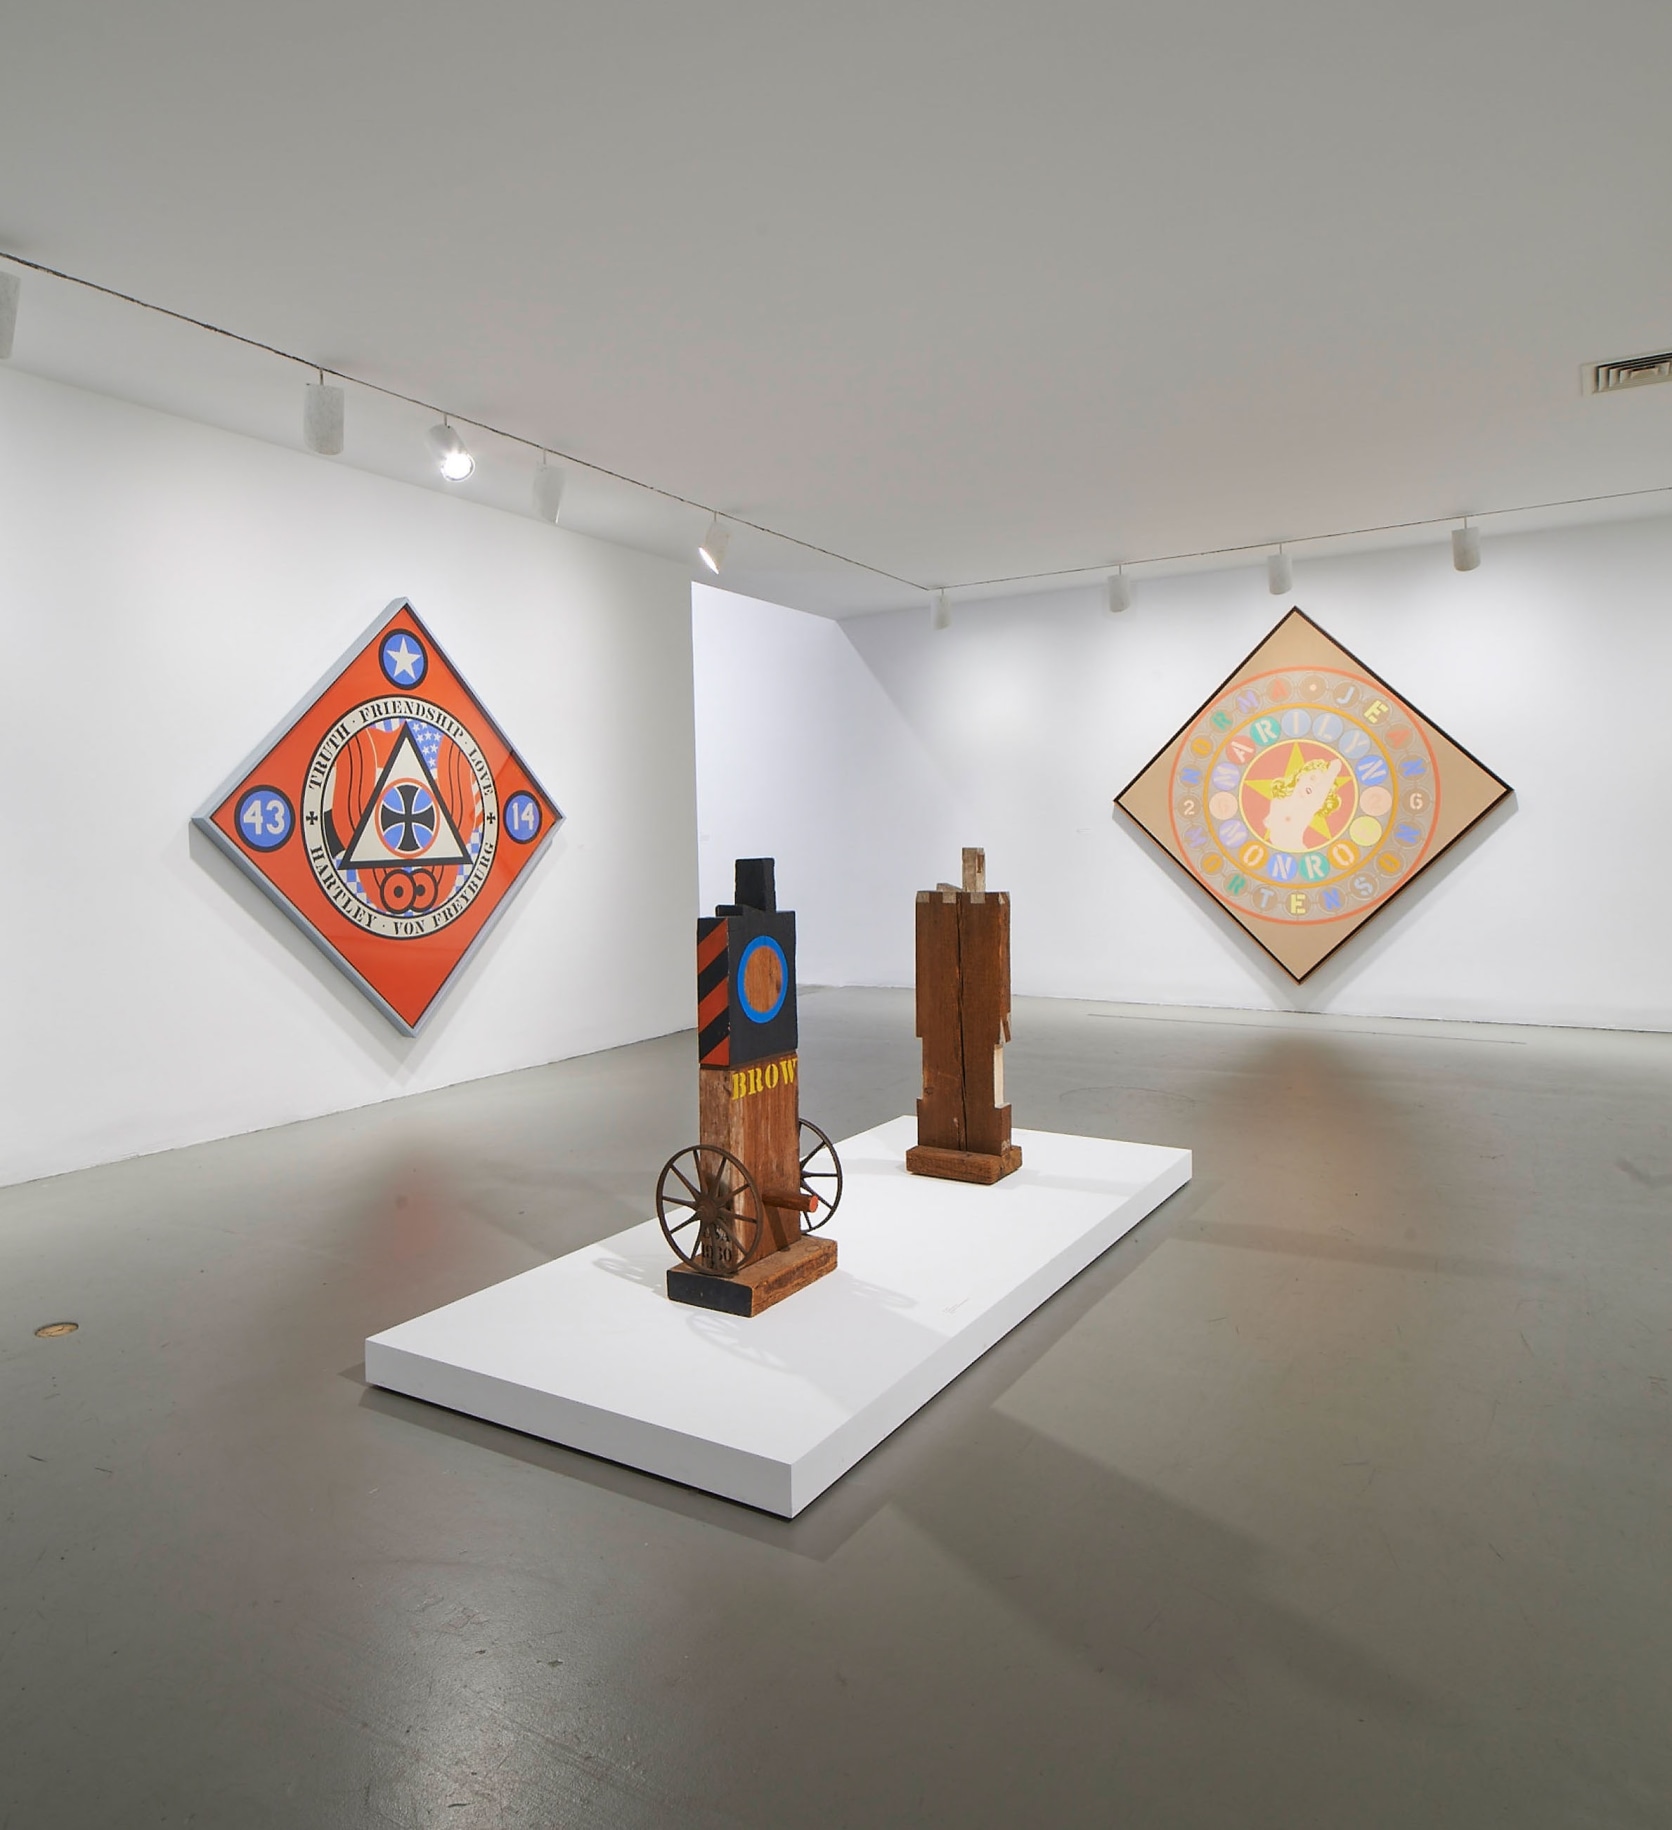 Installation view of Robert Indiana: Beyond LOVE, Whitney Museum of American Art, New York, September 26, 2013&ndash;January 5, 2014. Left to right,&nbsp;KvF X (Hartley Elegy) (1989&ndash;94), Brow (1960&ndash;62), M (1960), and The Metamporhosis of Norma Jean Mortenson (1967). Photo: Tom Powel Imaging